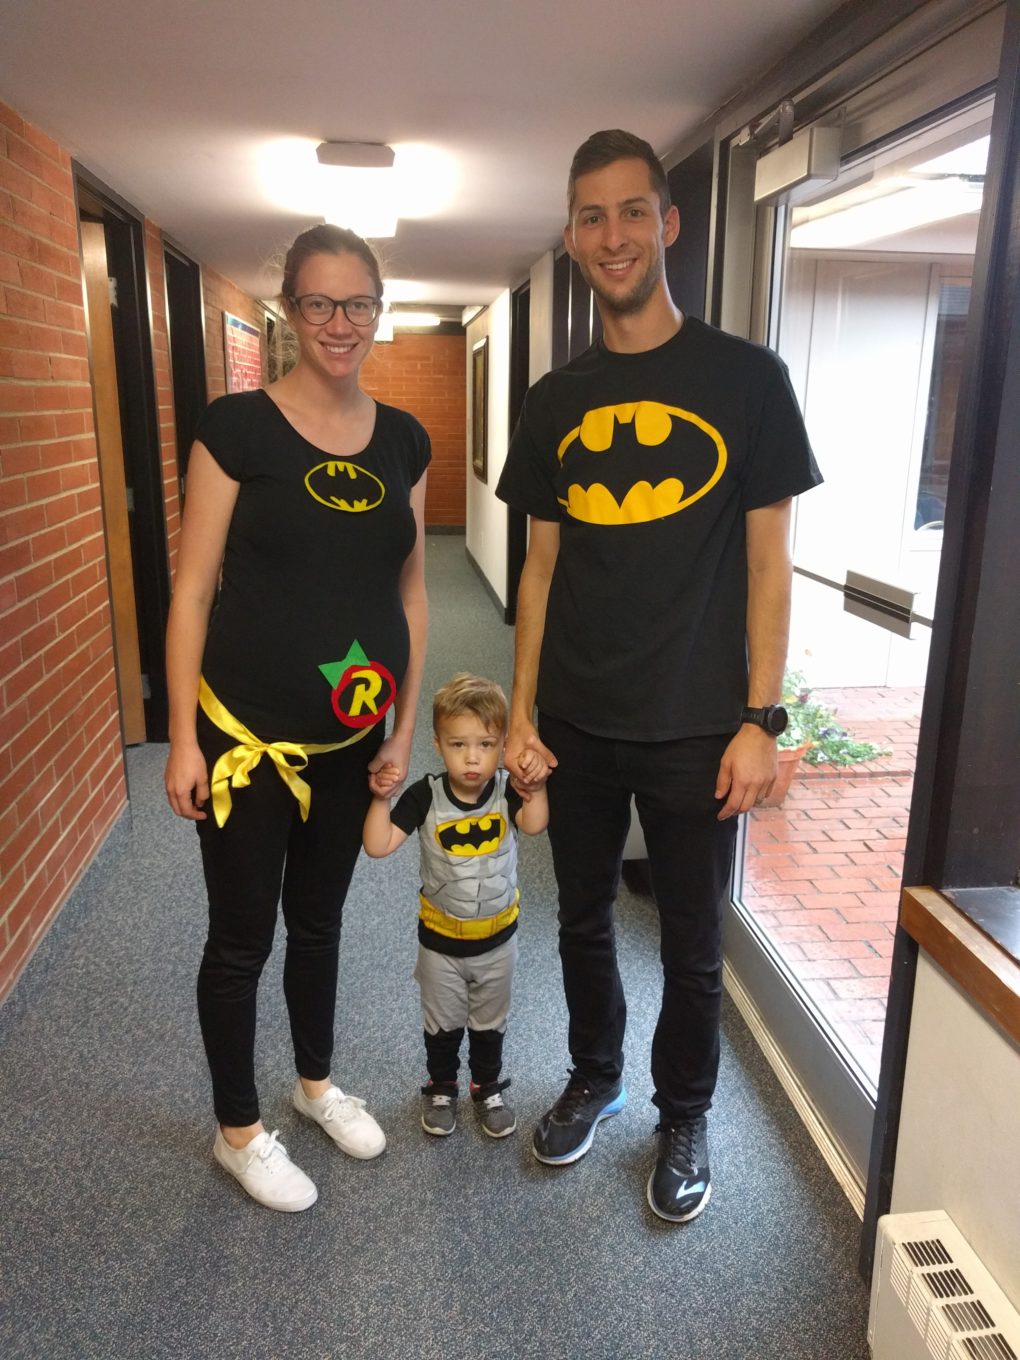 Batman, Batgirl, and Robin (the Sidekick... literally). Group Halloween costume ideas for your big or small group of family or friends. Creative themed costumes that are easy to DIY or buy last minute.